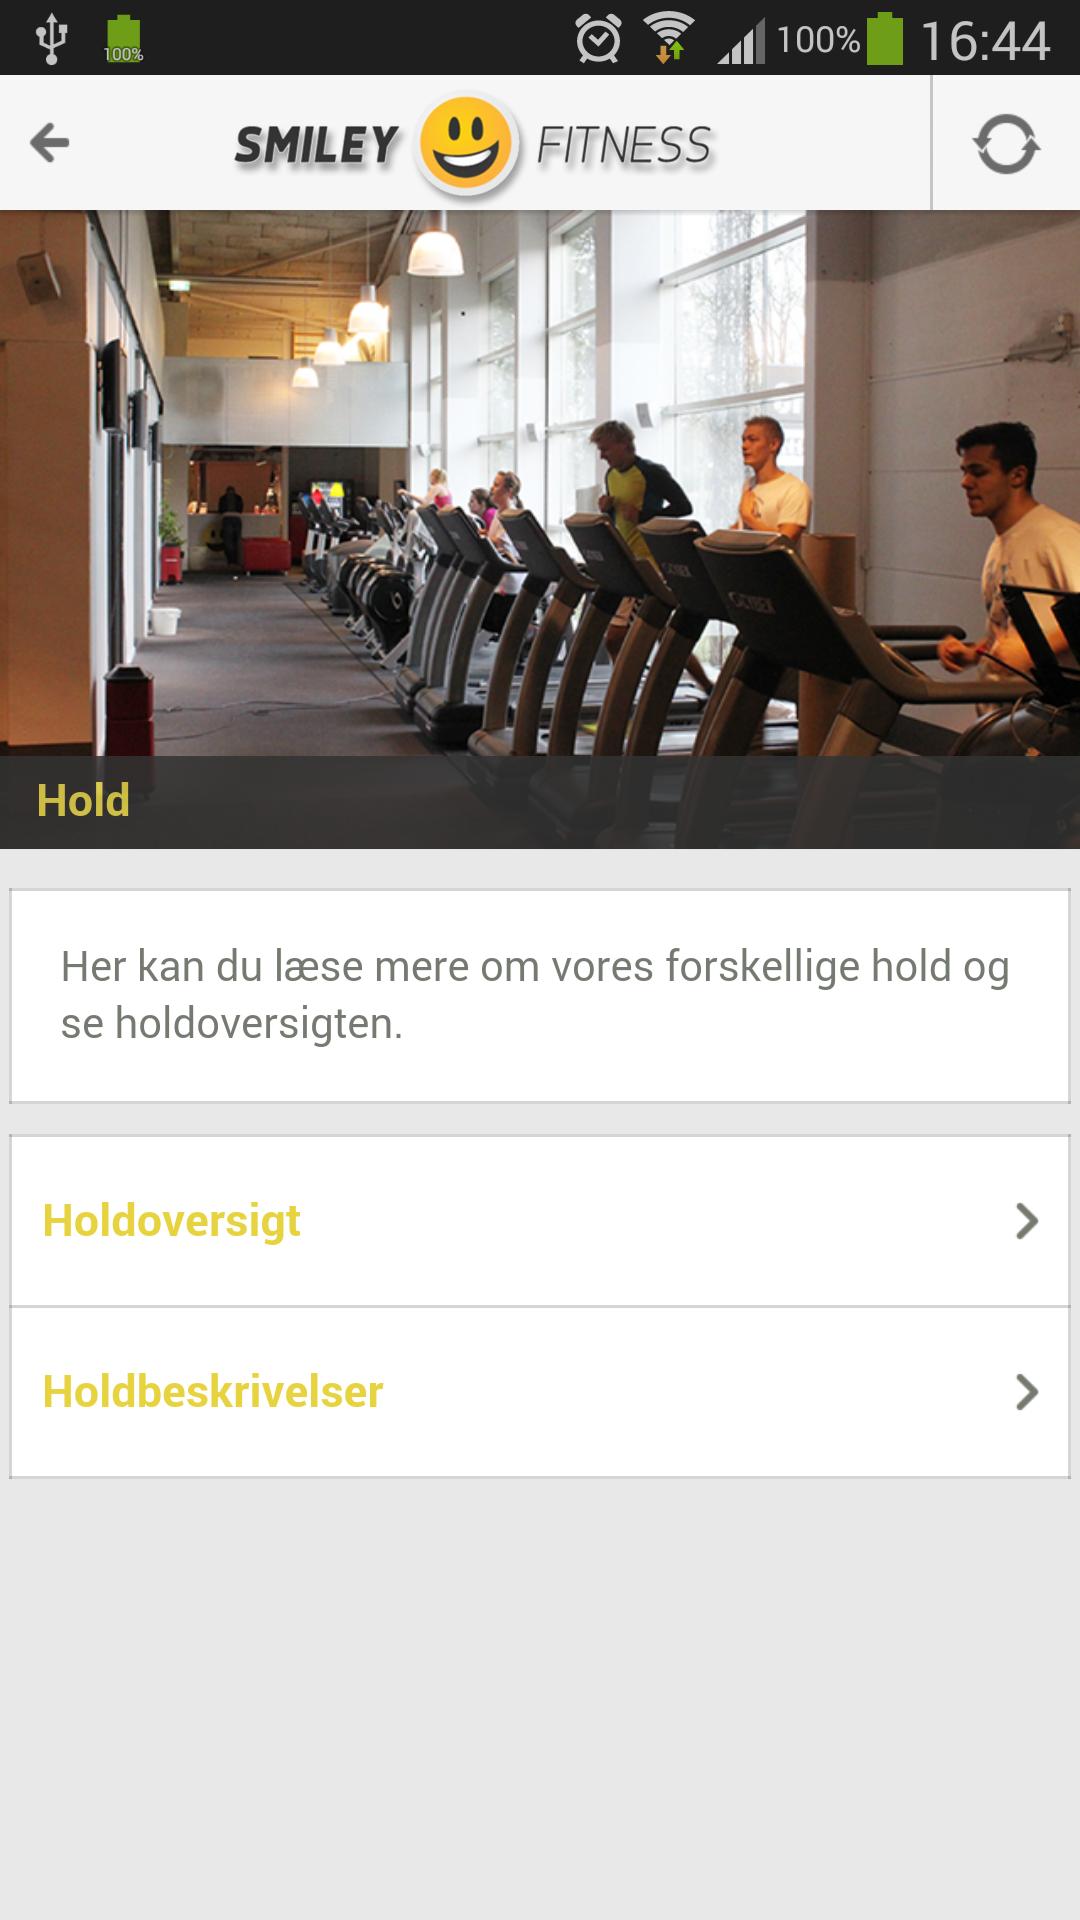 Smiley Fitness for Android - APK Download